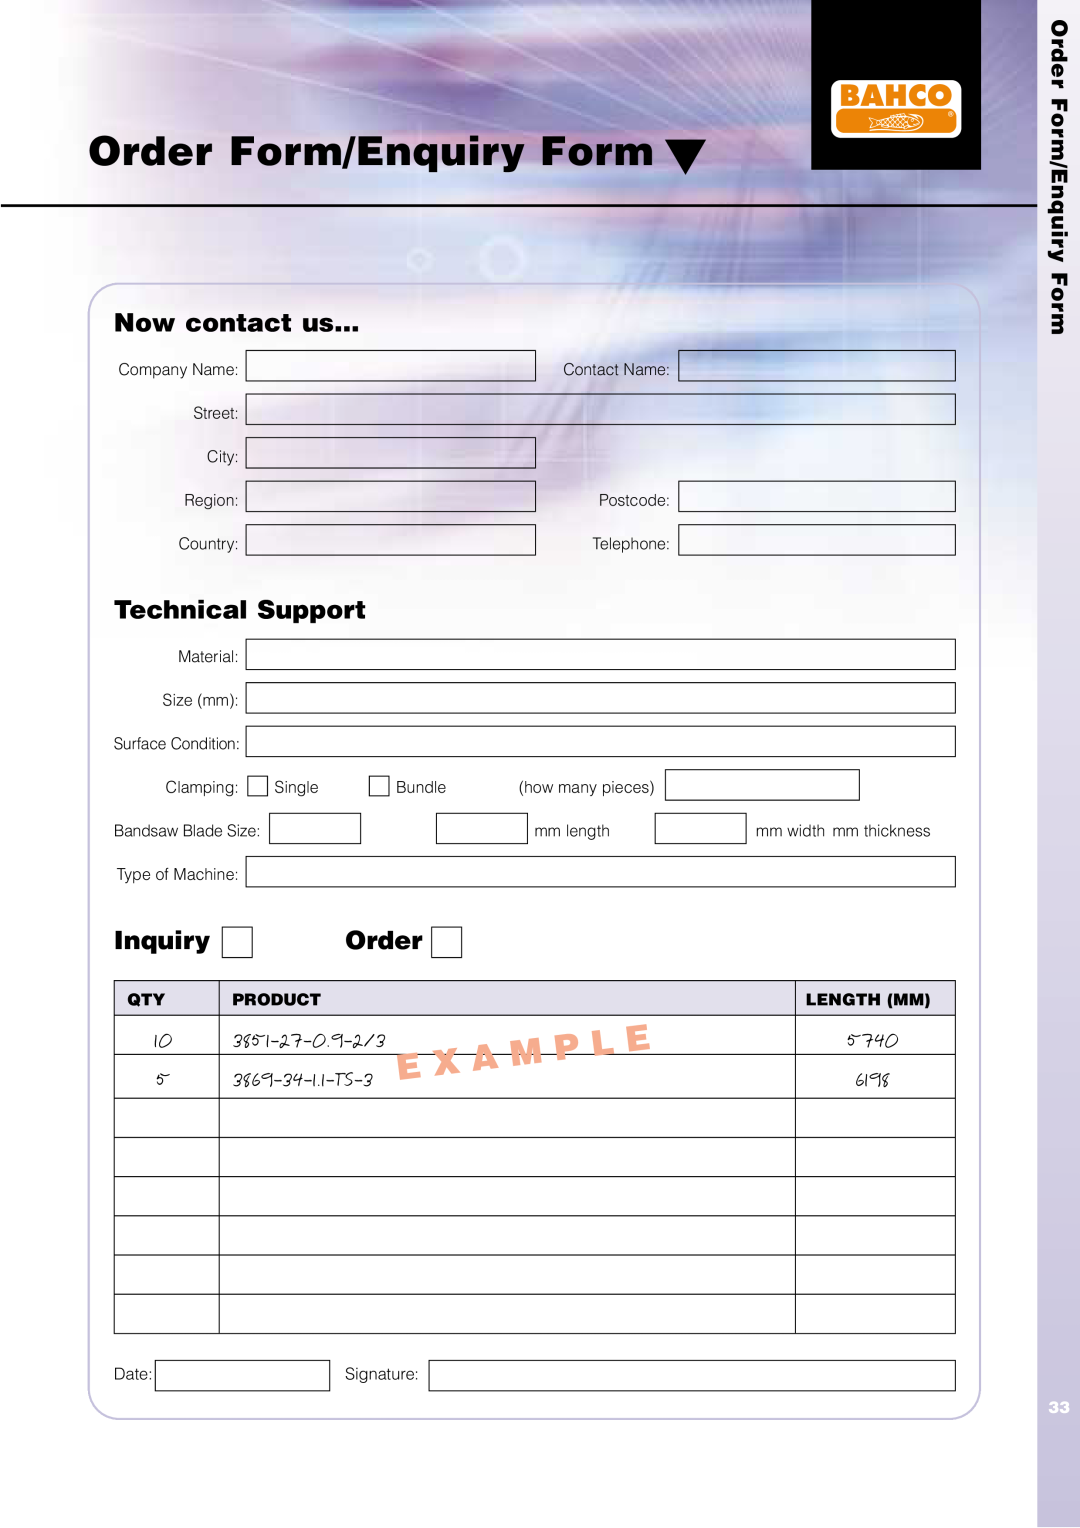 Bahco Saw manual Order Form/Enquiry Form, Now contact us…, Technical Support, Inquiry, Product, Length Mm 